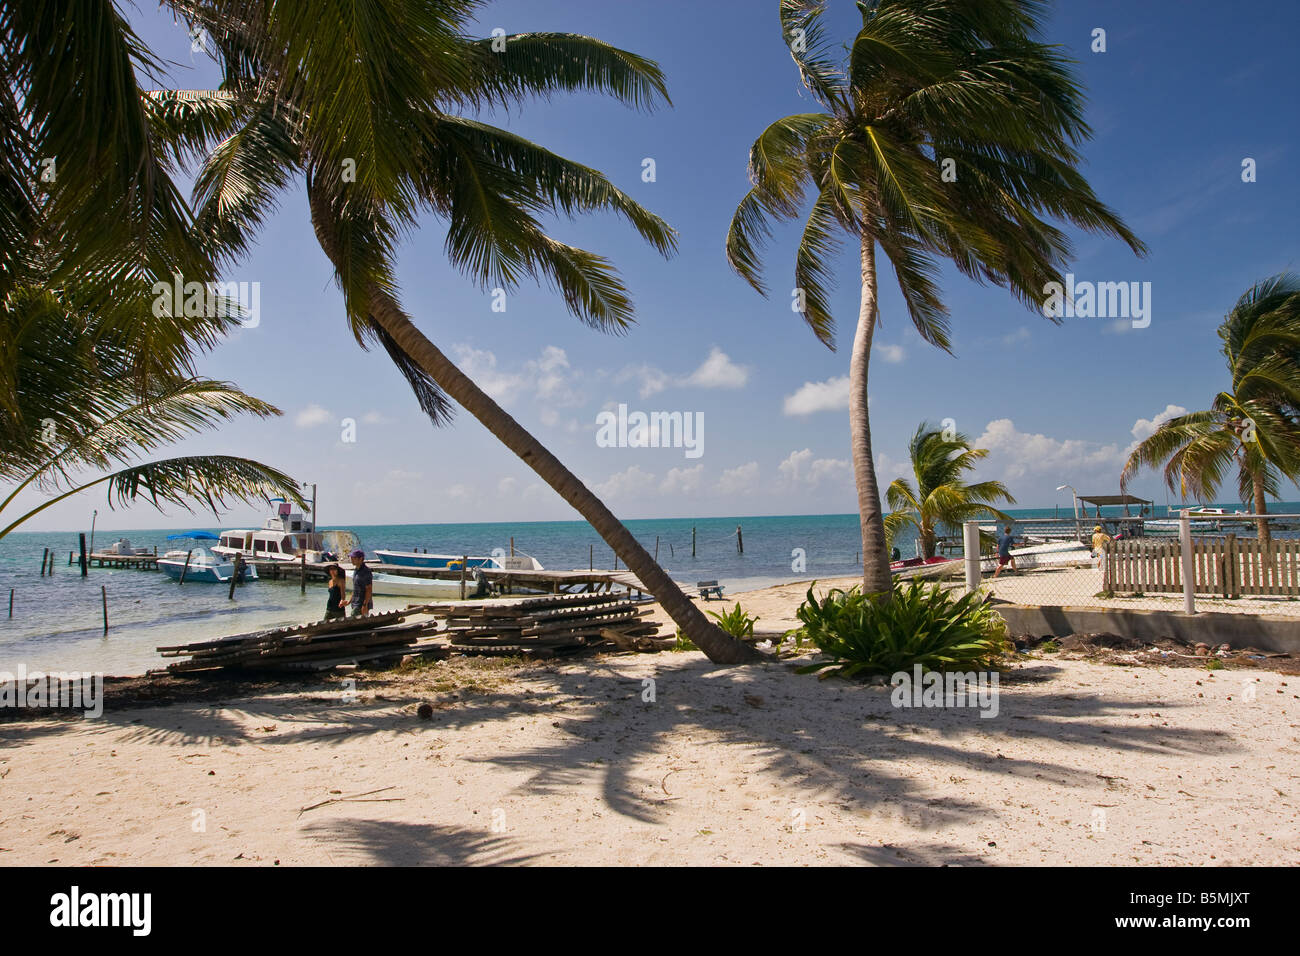 CAYE CAULKER, BELIZE - waterfront beach and palm trees. Stock Photo